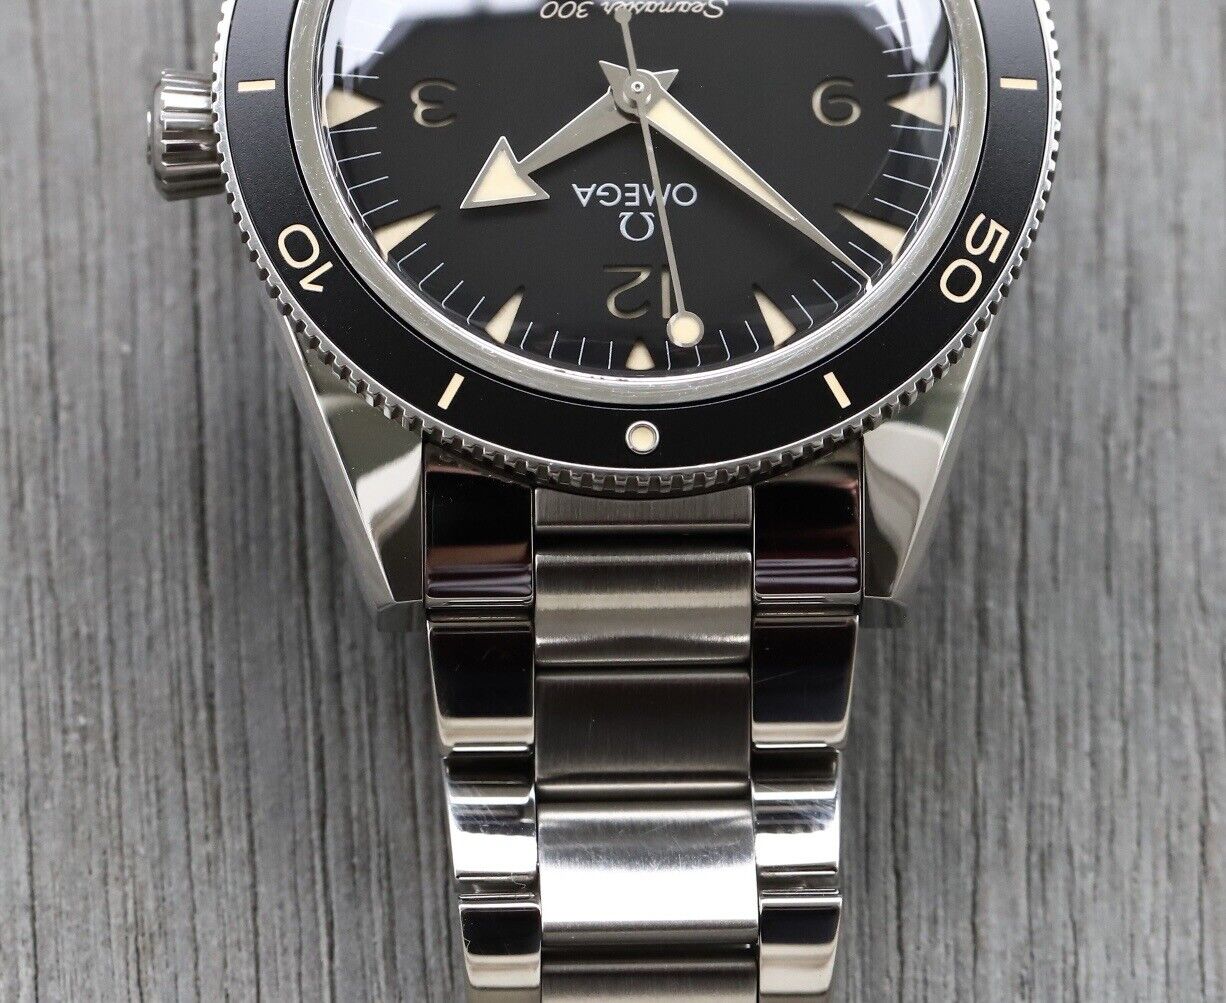 Omega Seamaster 300 Co-Axial 41mm 234.30.41.21.01.001 - 2022